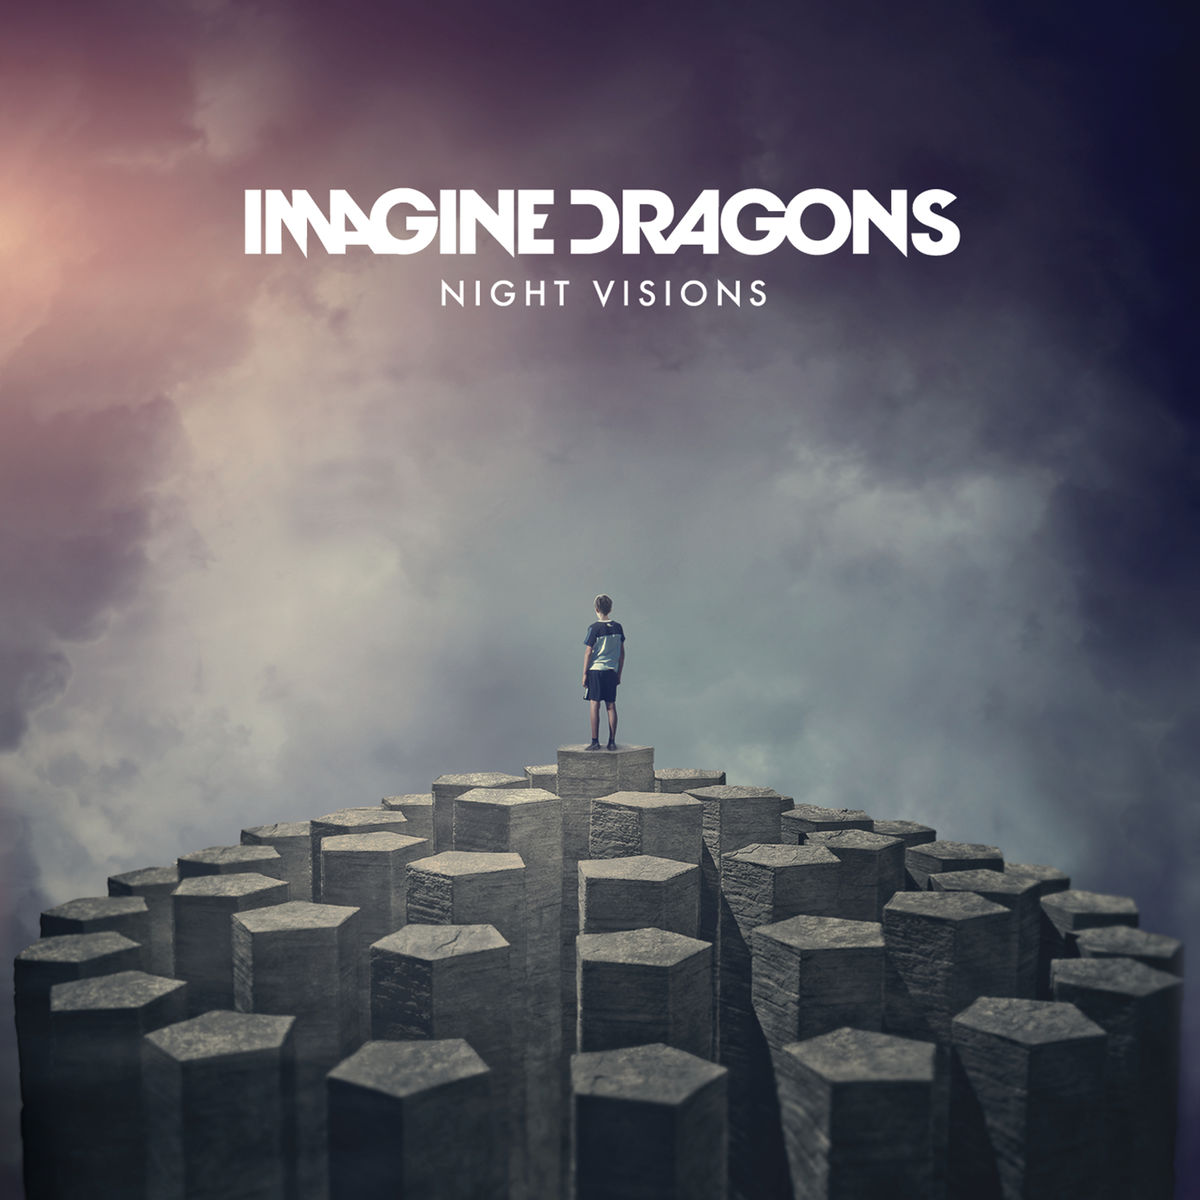 Believer (Imagine Dragons song) - Wikipedia